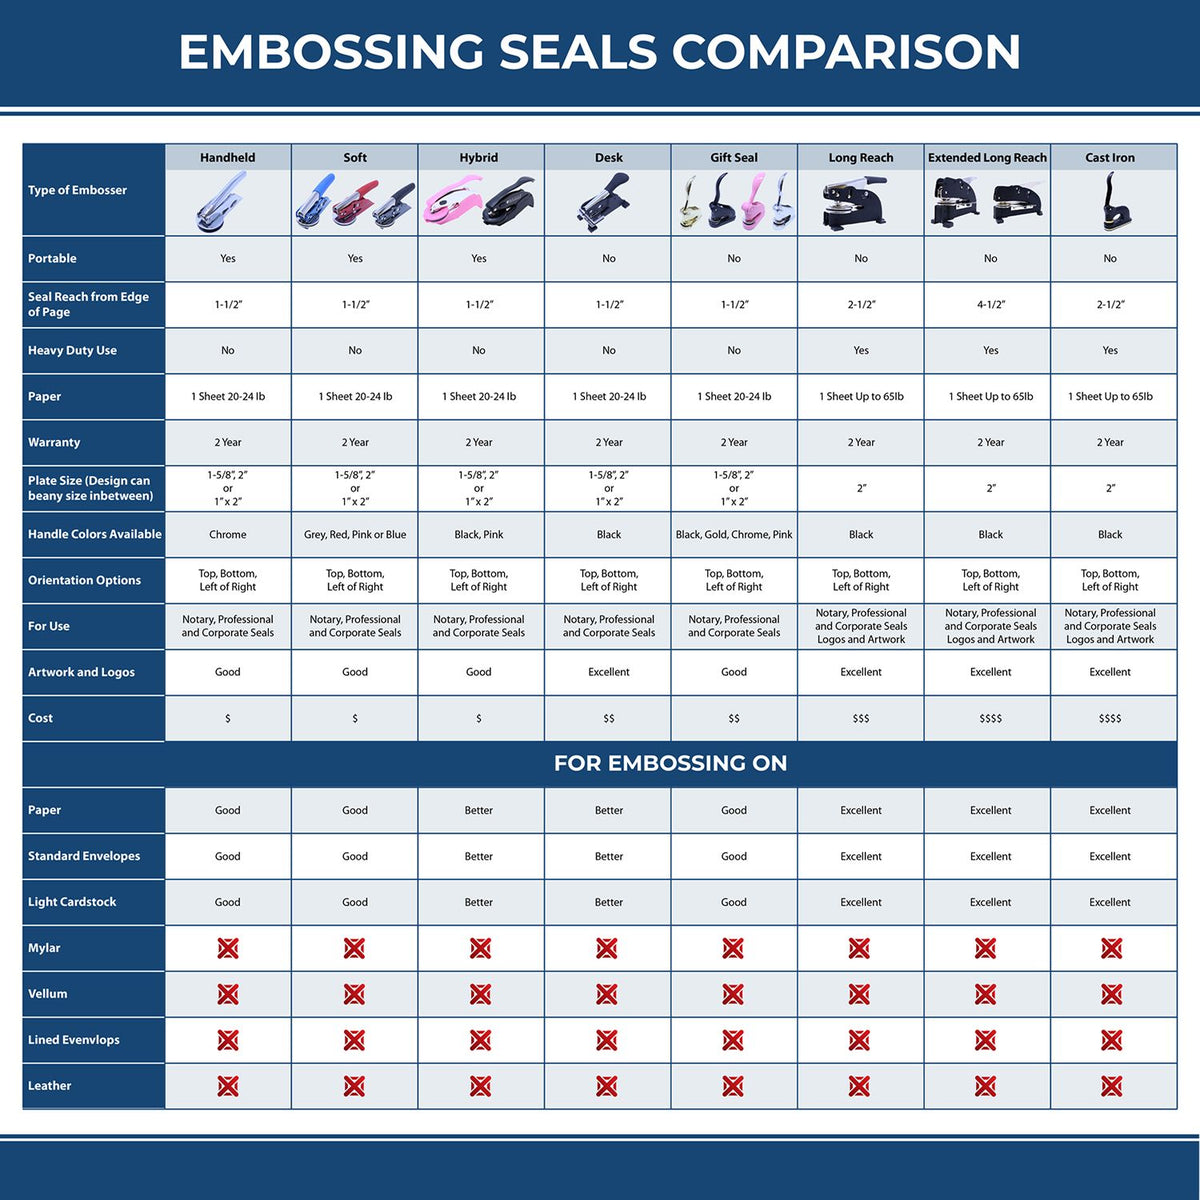 A comparison chart for the different types of mount models available for the Heavy Duty Cast Iron Montana Geologist Seal Embosser